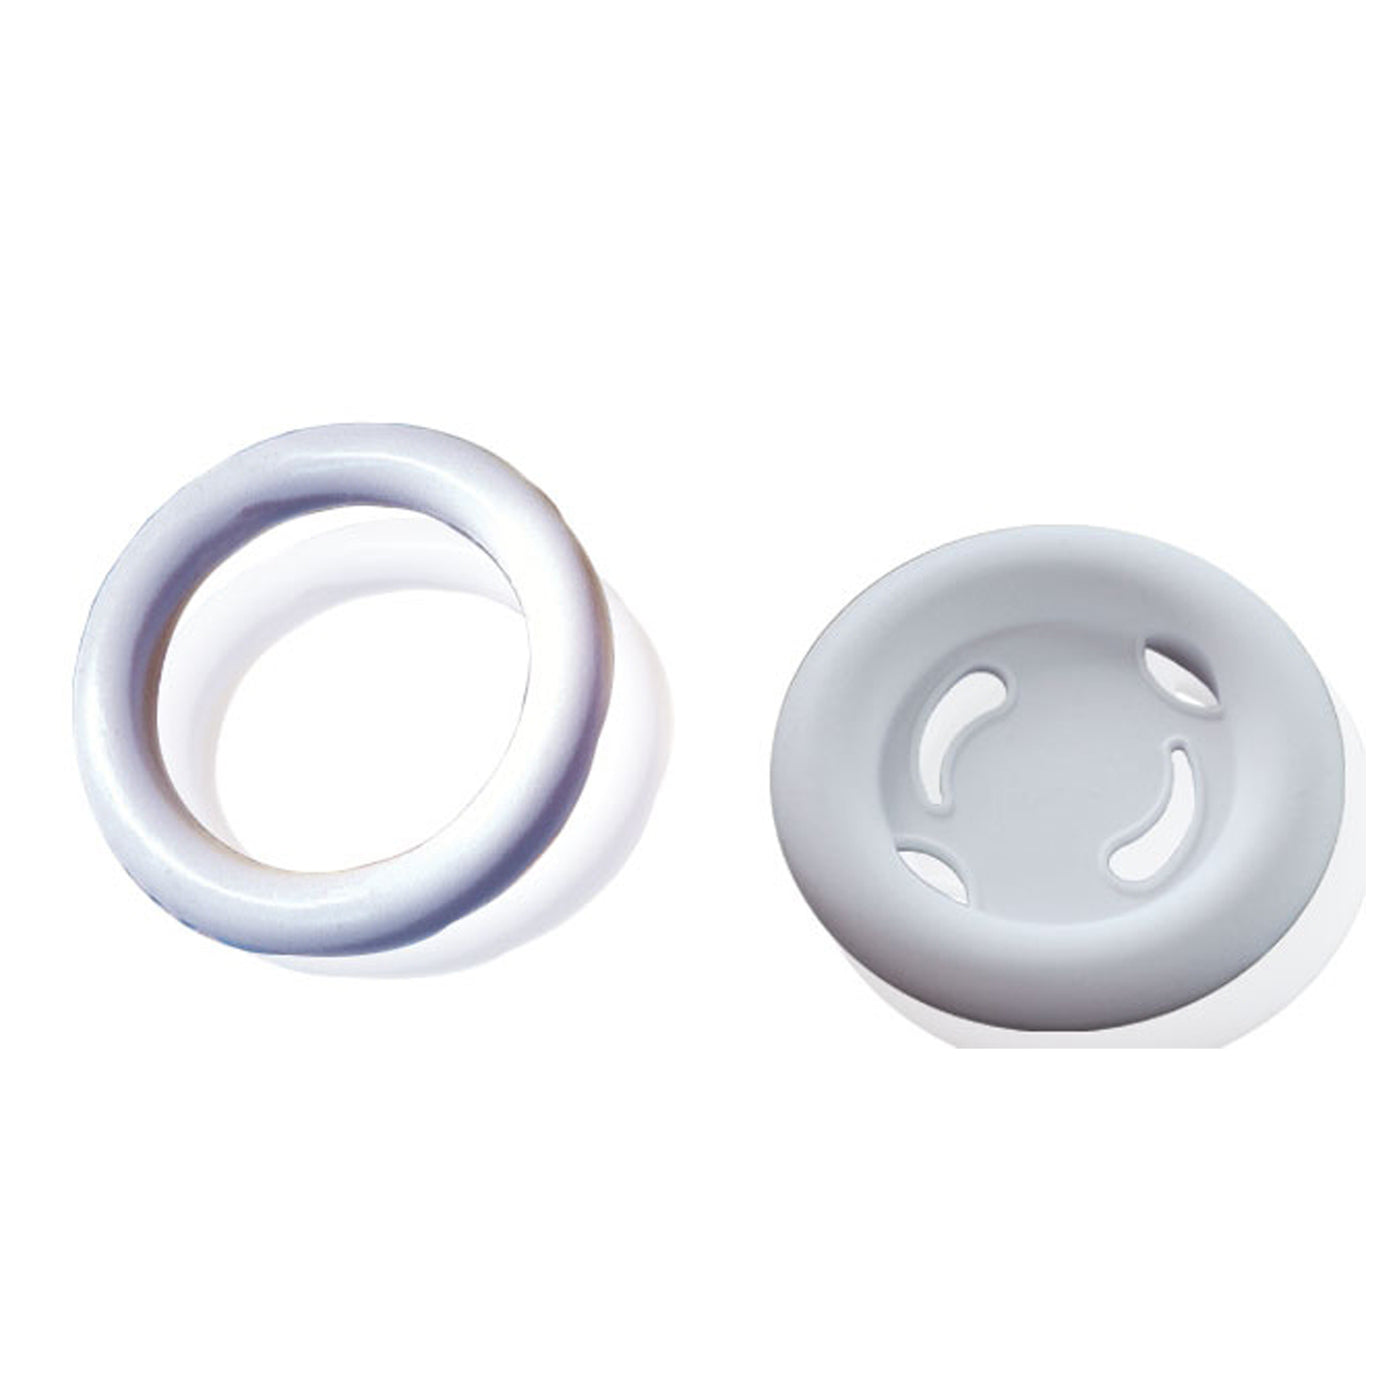 Ring Vaginal Pessary Silicone Non Sterile Manufacturer Suppliers India